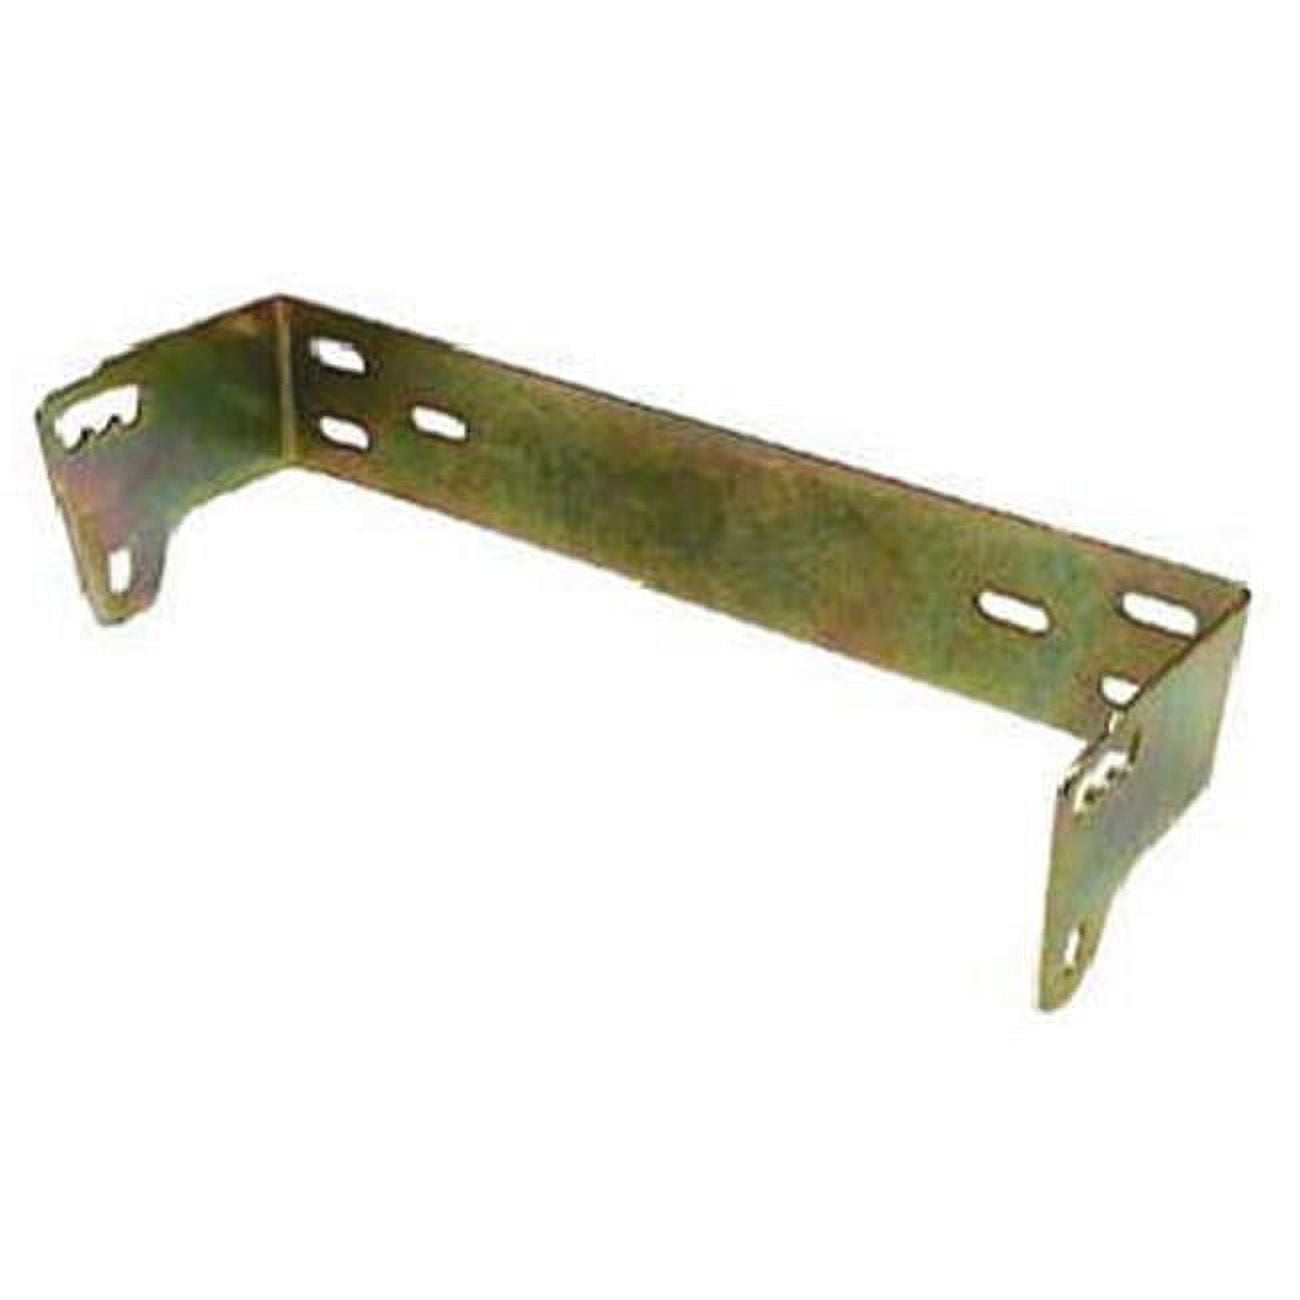 Picture of Accessories Unlimited AU68 8.25 in. Brass Finish 2 Hole Replacement Mounting Bracket for Uniden Grant, Cobra 148 & Other Radios